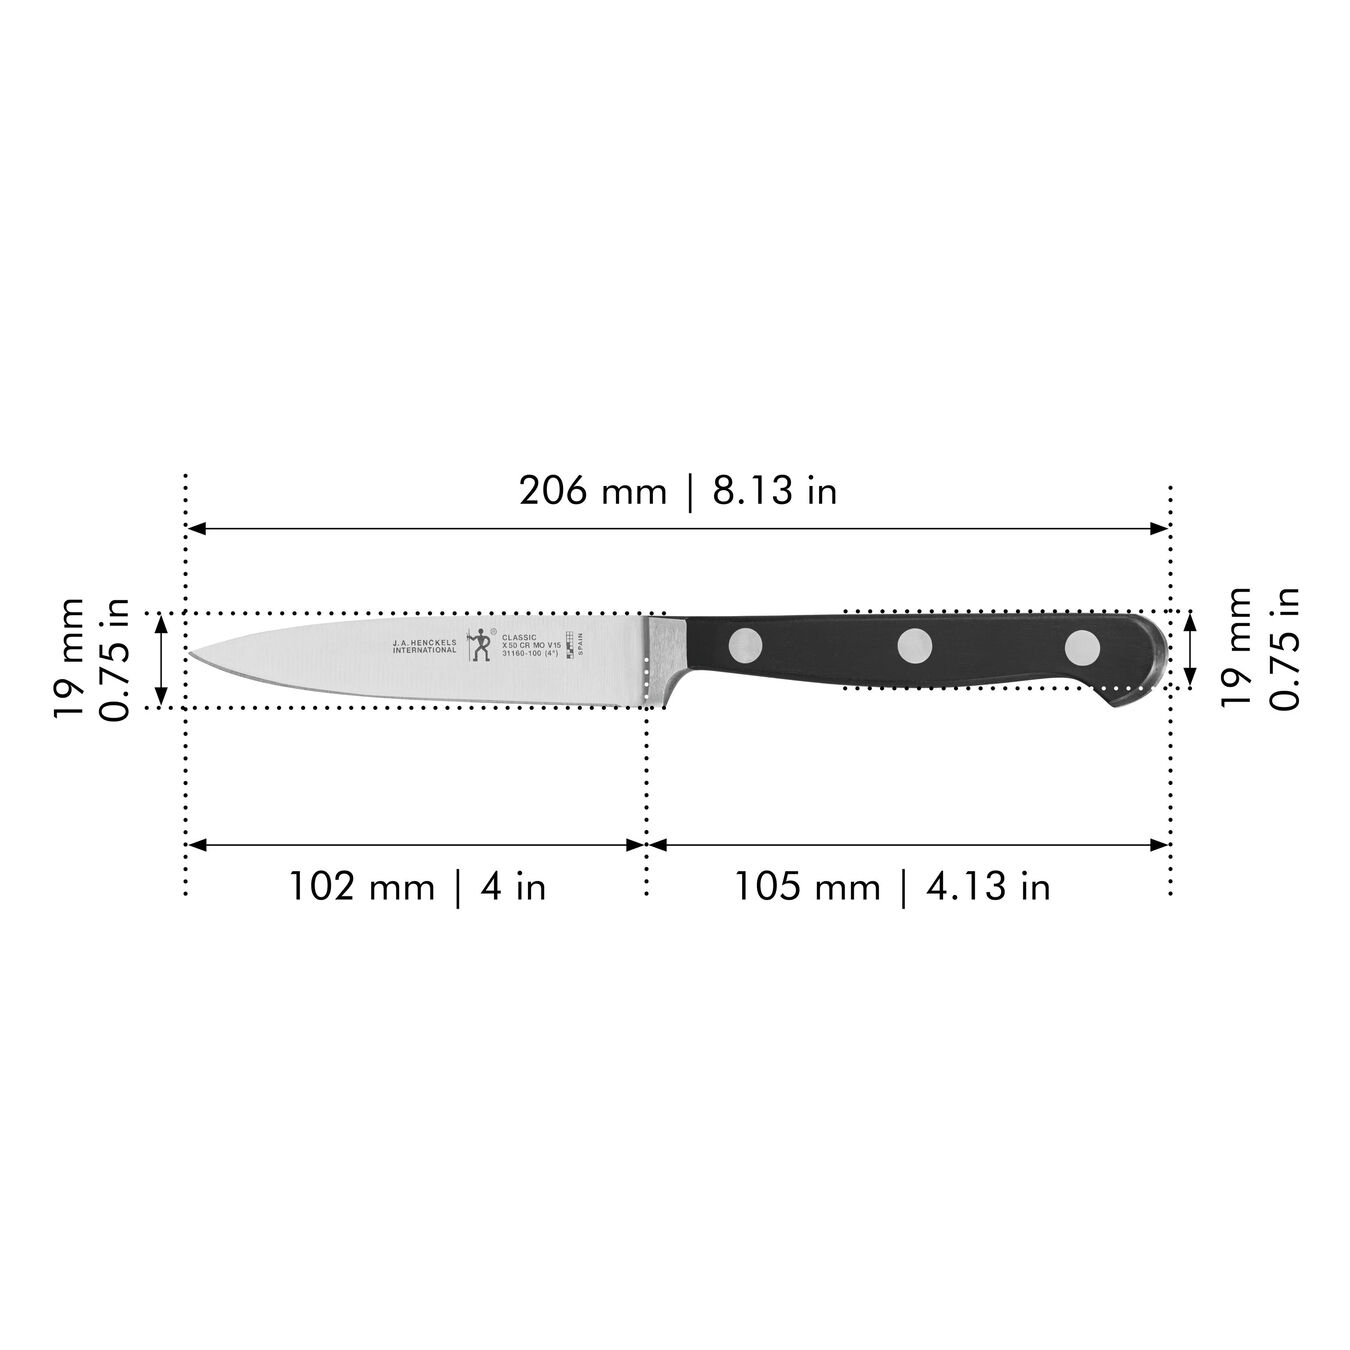 4 inch Paring knife,,large 2